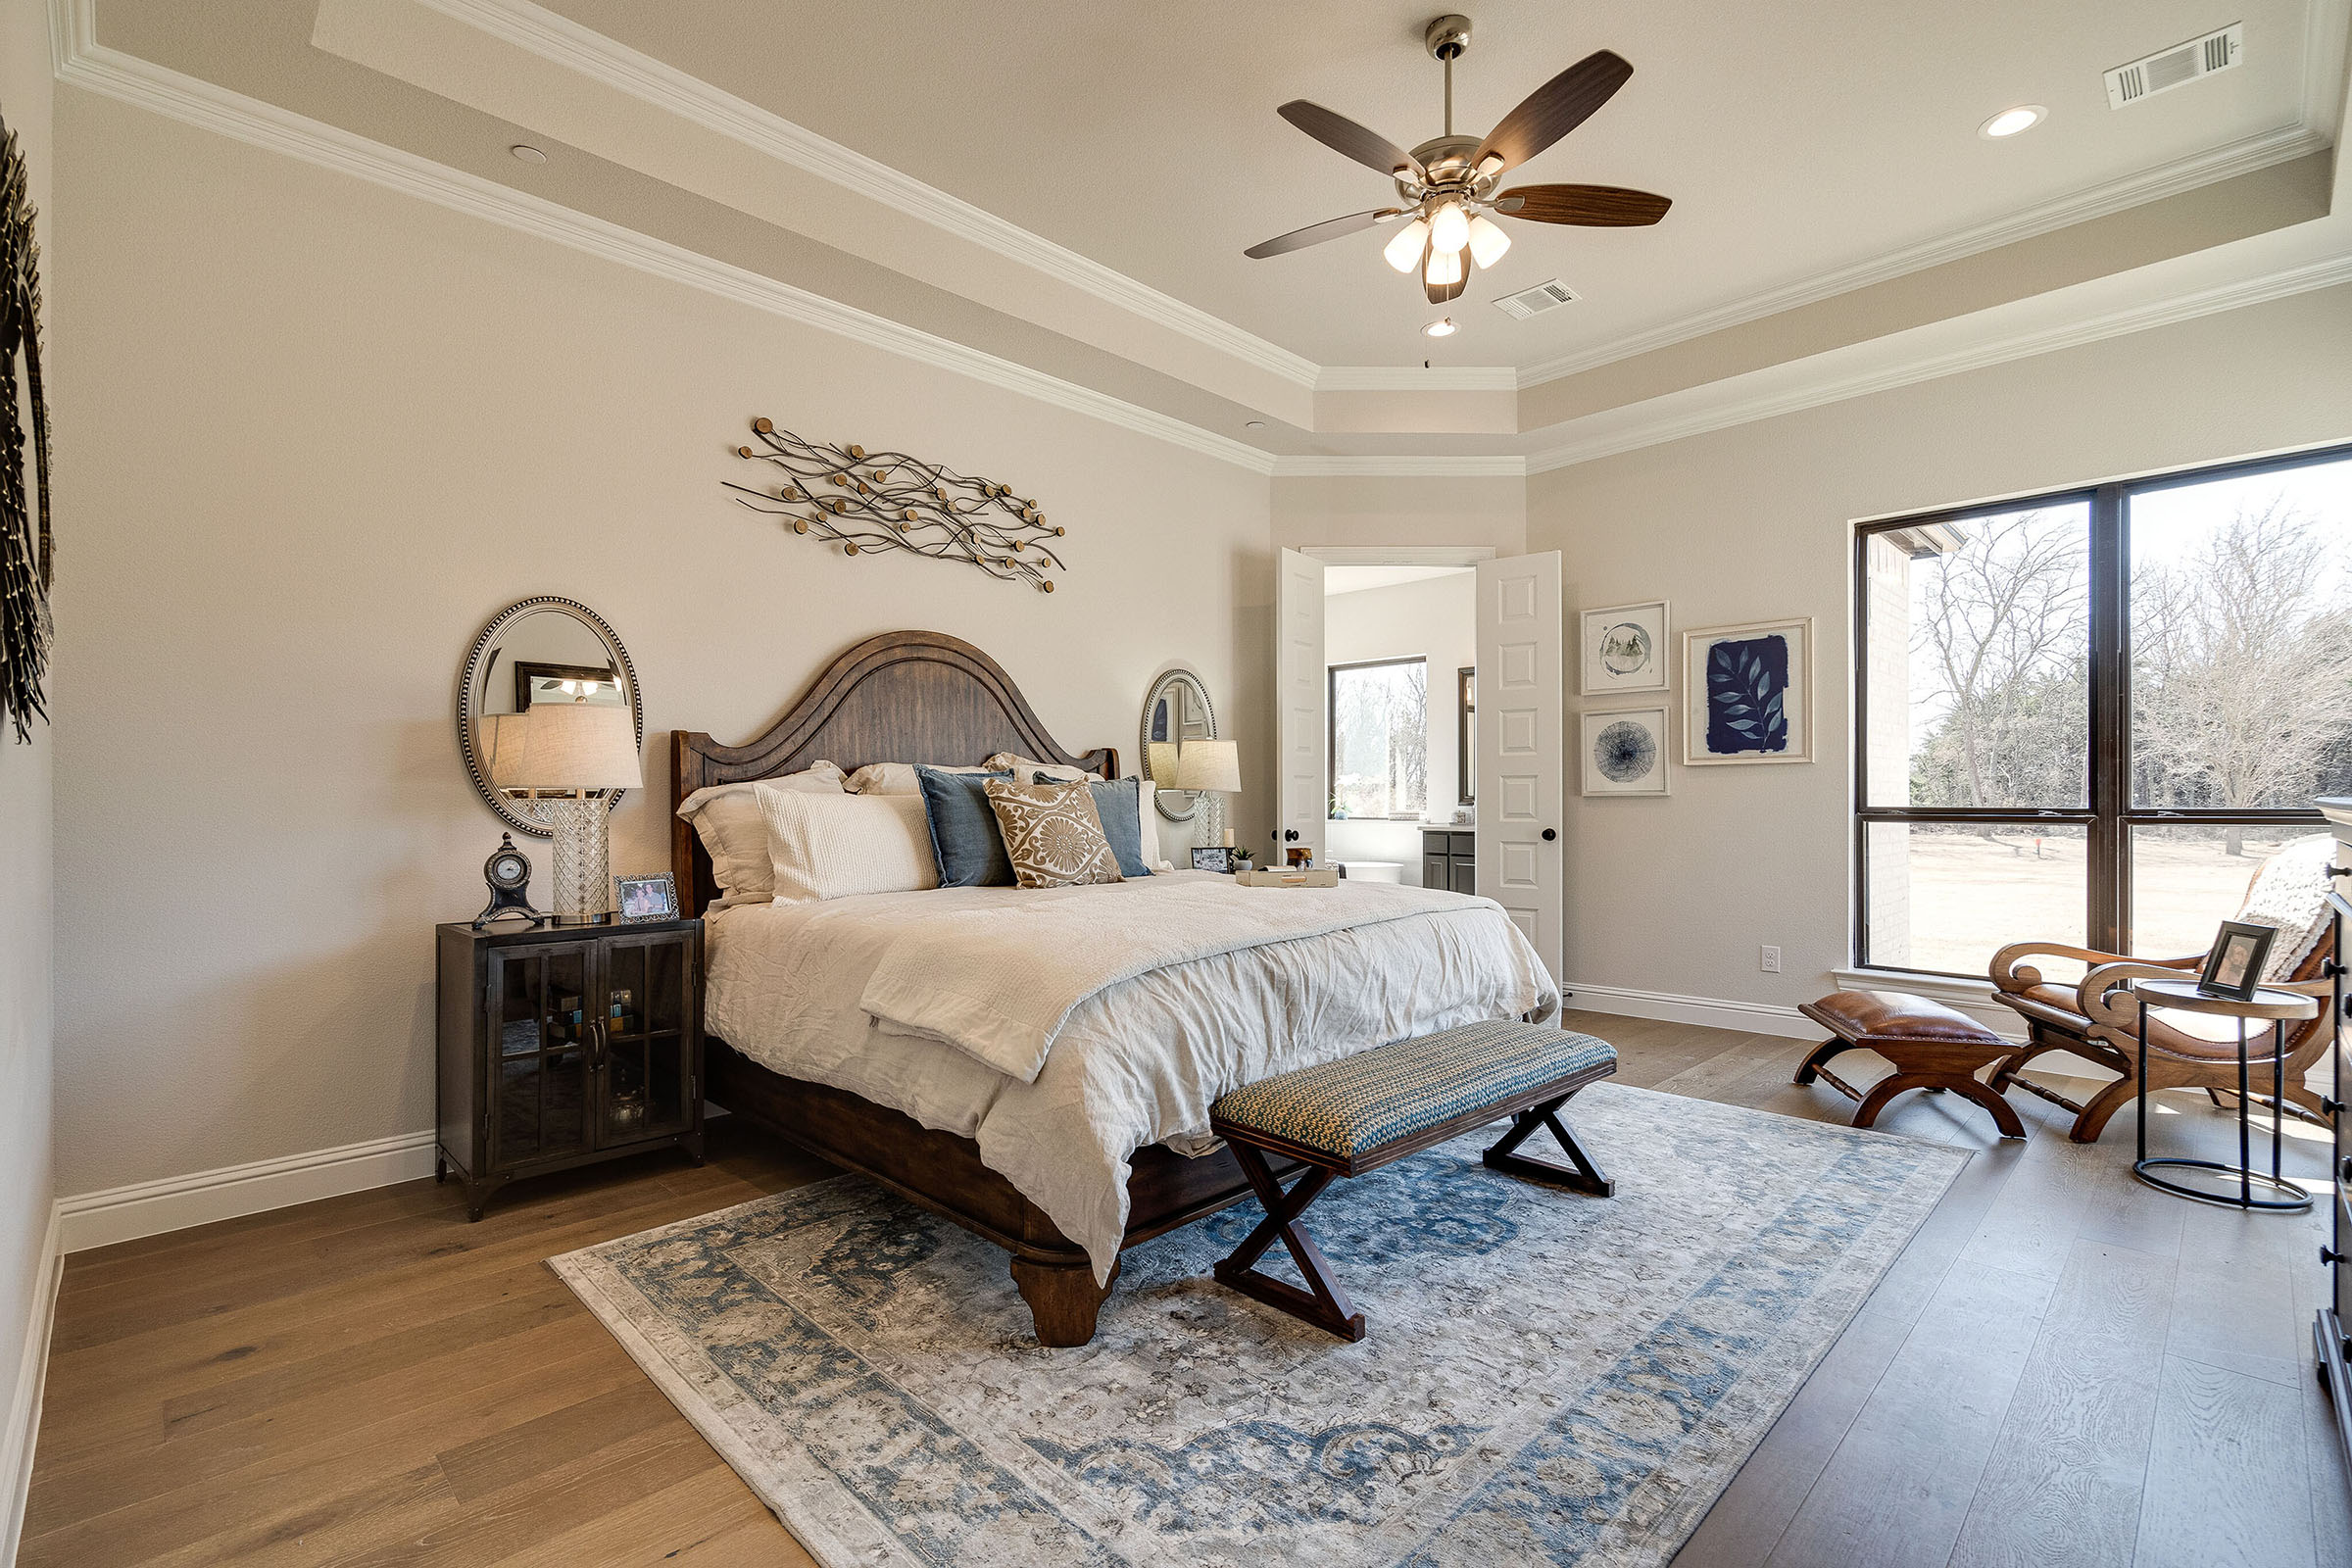 Dallas/Ft. Worth - Lakeview Downs Bedrooms Image